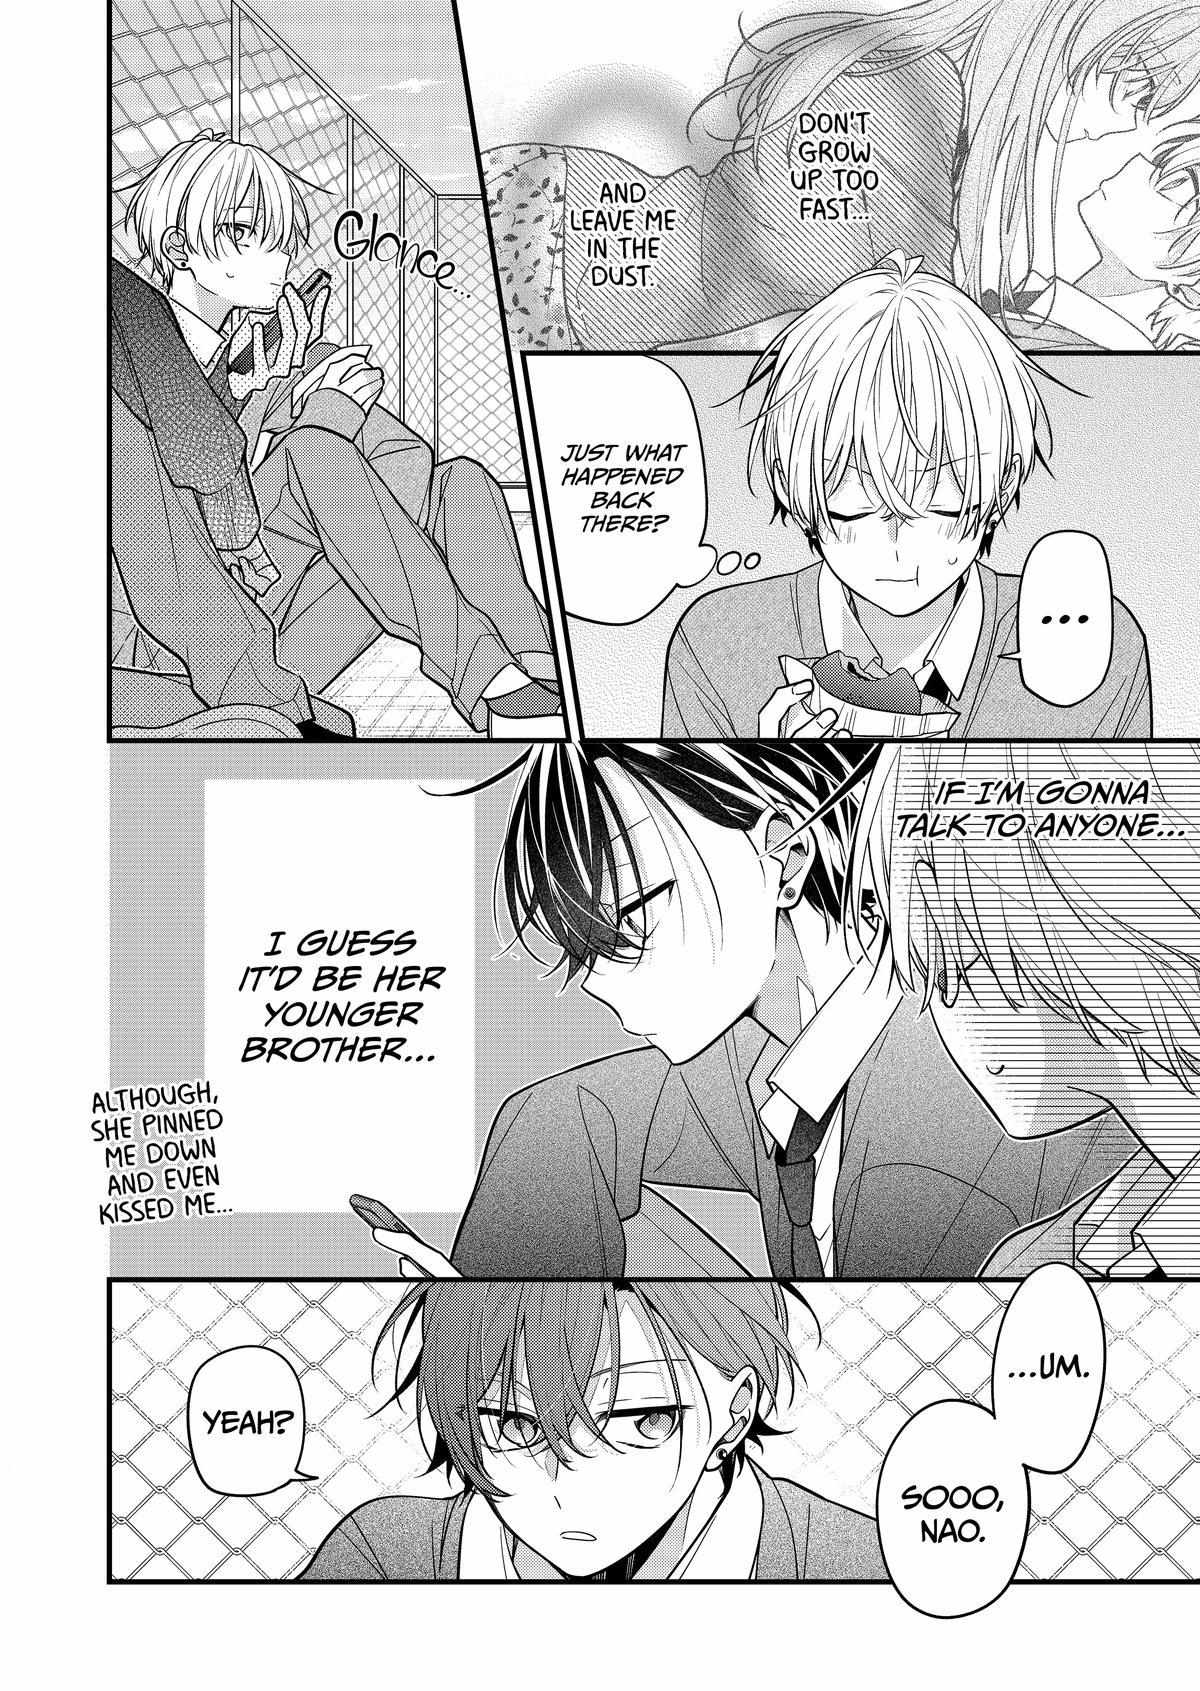 The Story Of A Guy Who Fell In Love With His Friend's Sister - Page 1